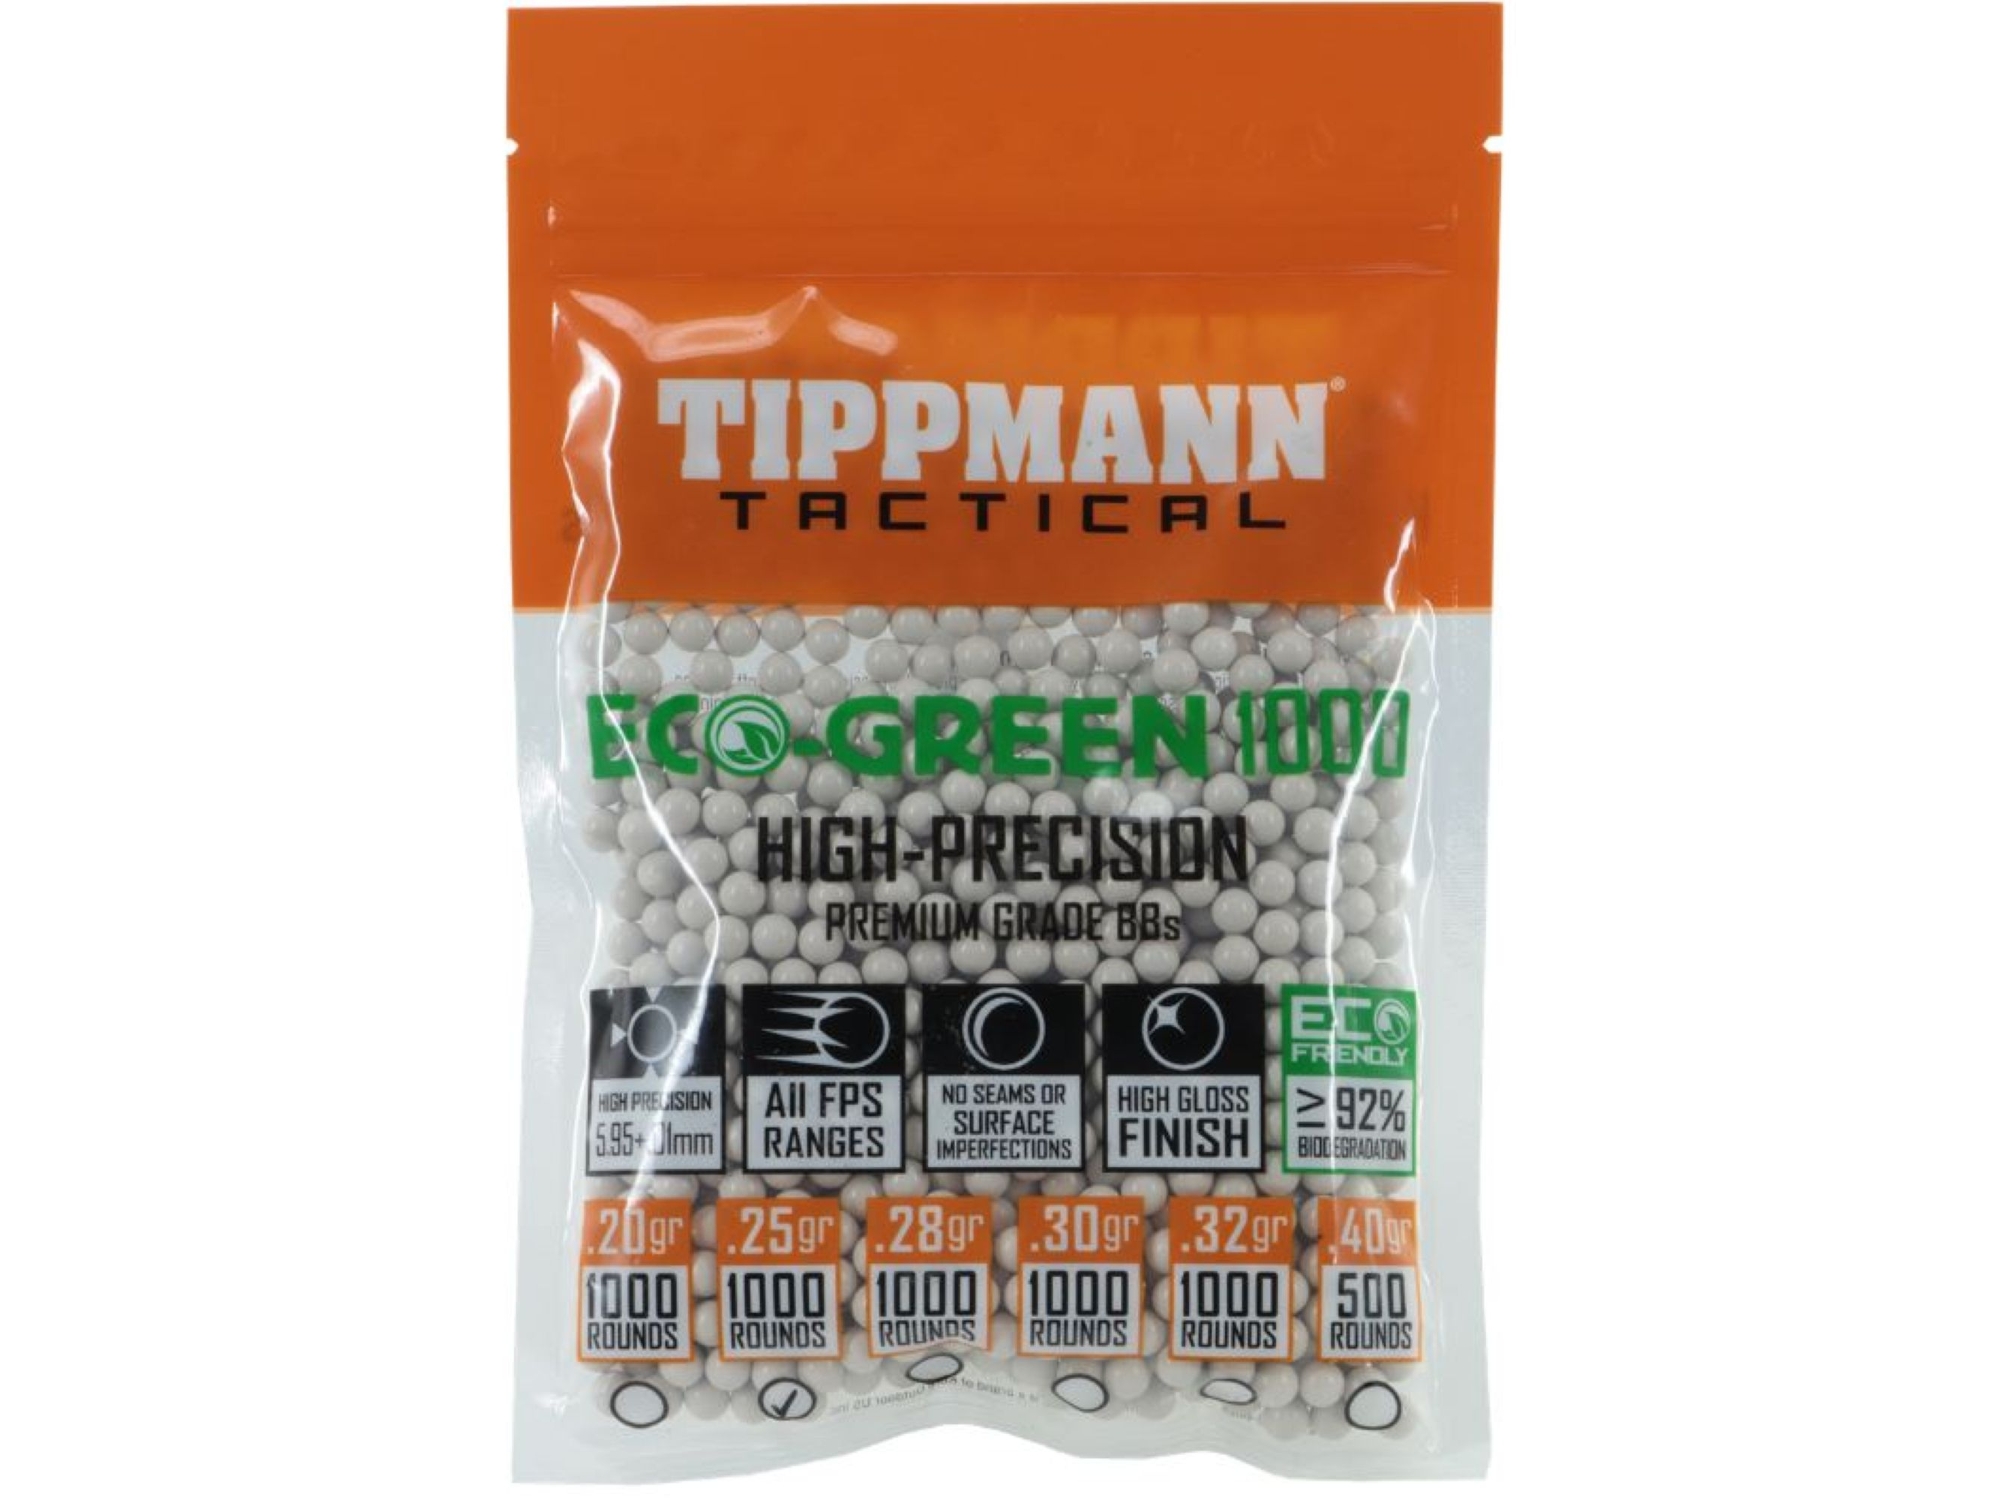 Tippmann Tactical Airsoft BB Eco 1000ct .25g White, 6mm, 1000 Count 6mm